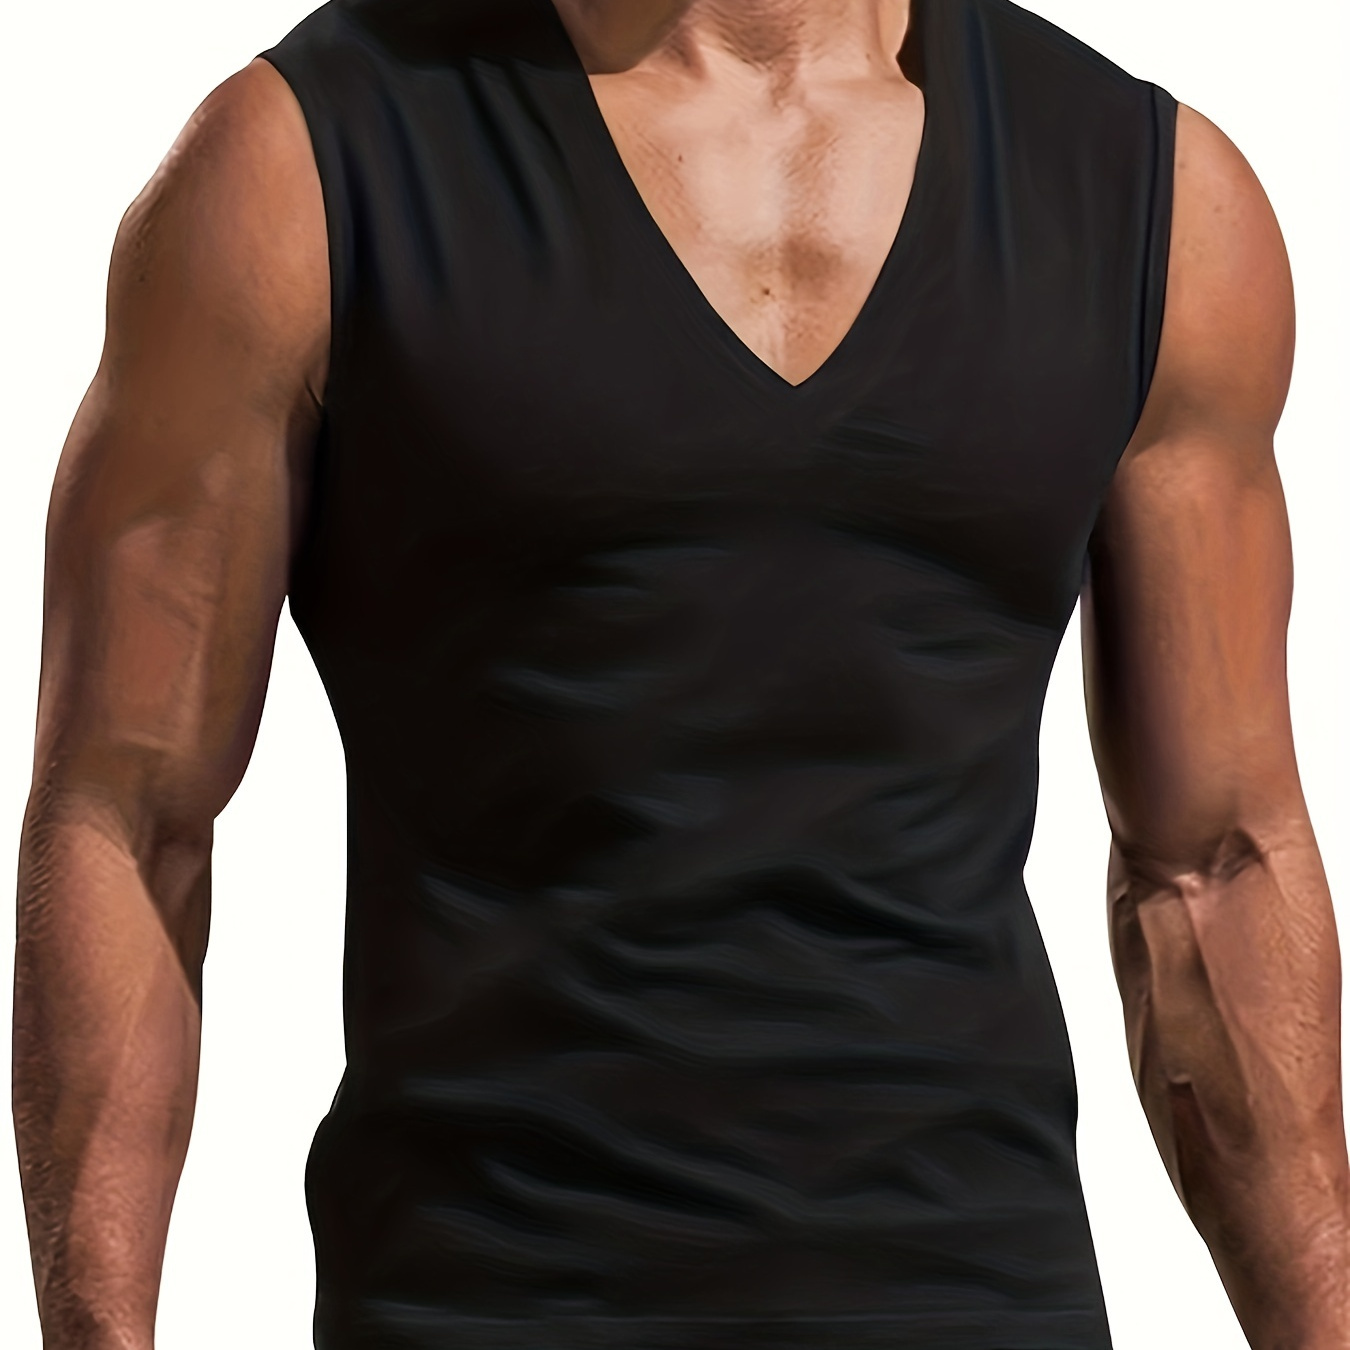 

Men Solid Color V Neck Tank Tops Summer Mens Clothing Gym Bodybuilding Training Fitness Sleeveless Muscle T Shirts Slim Fit Workout Vest Tshirt Top